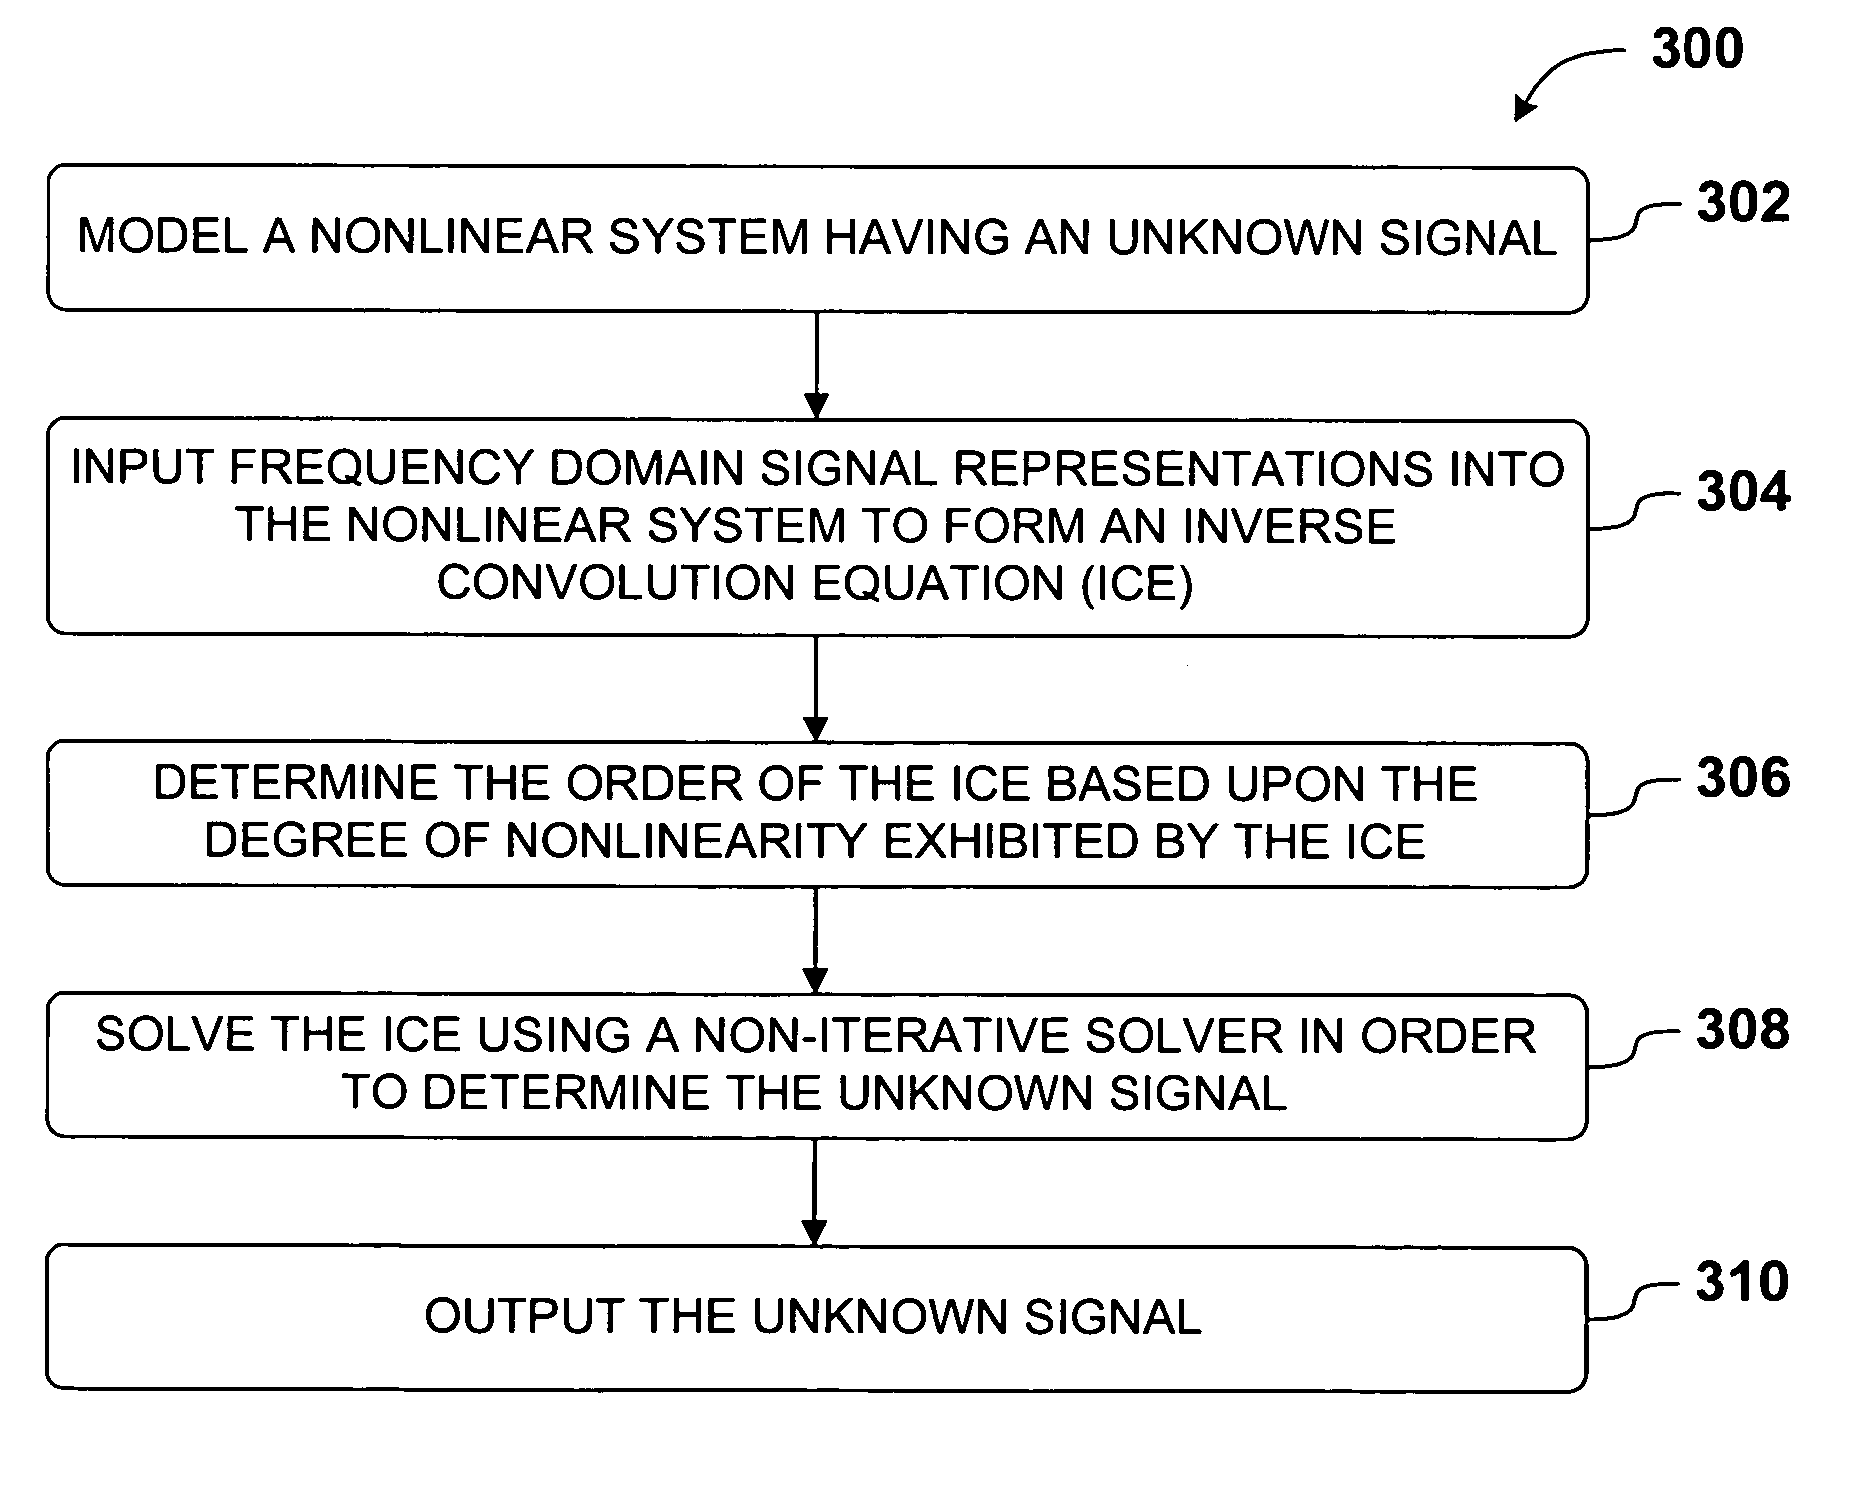 Efficient non-iterative frequency domain method and system for nonlinear analysis